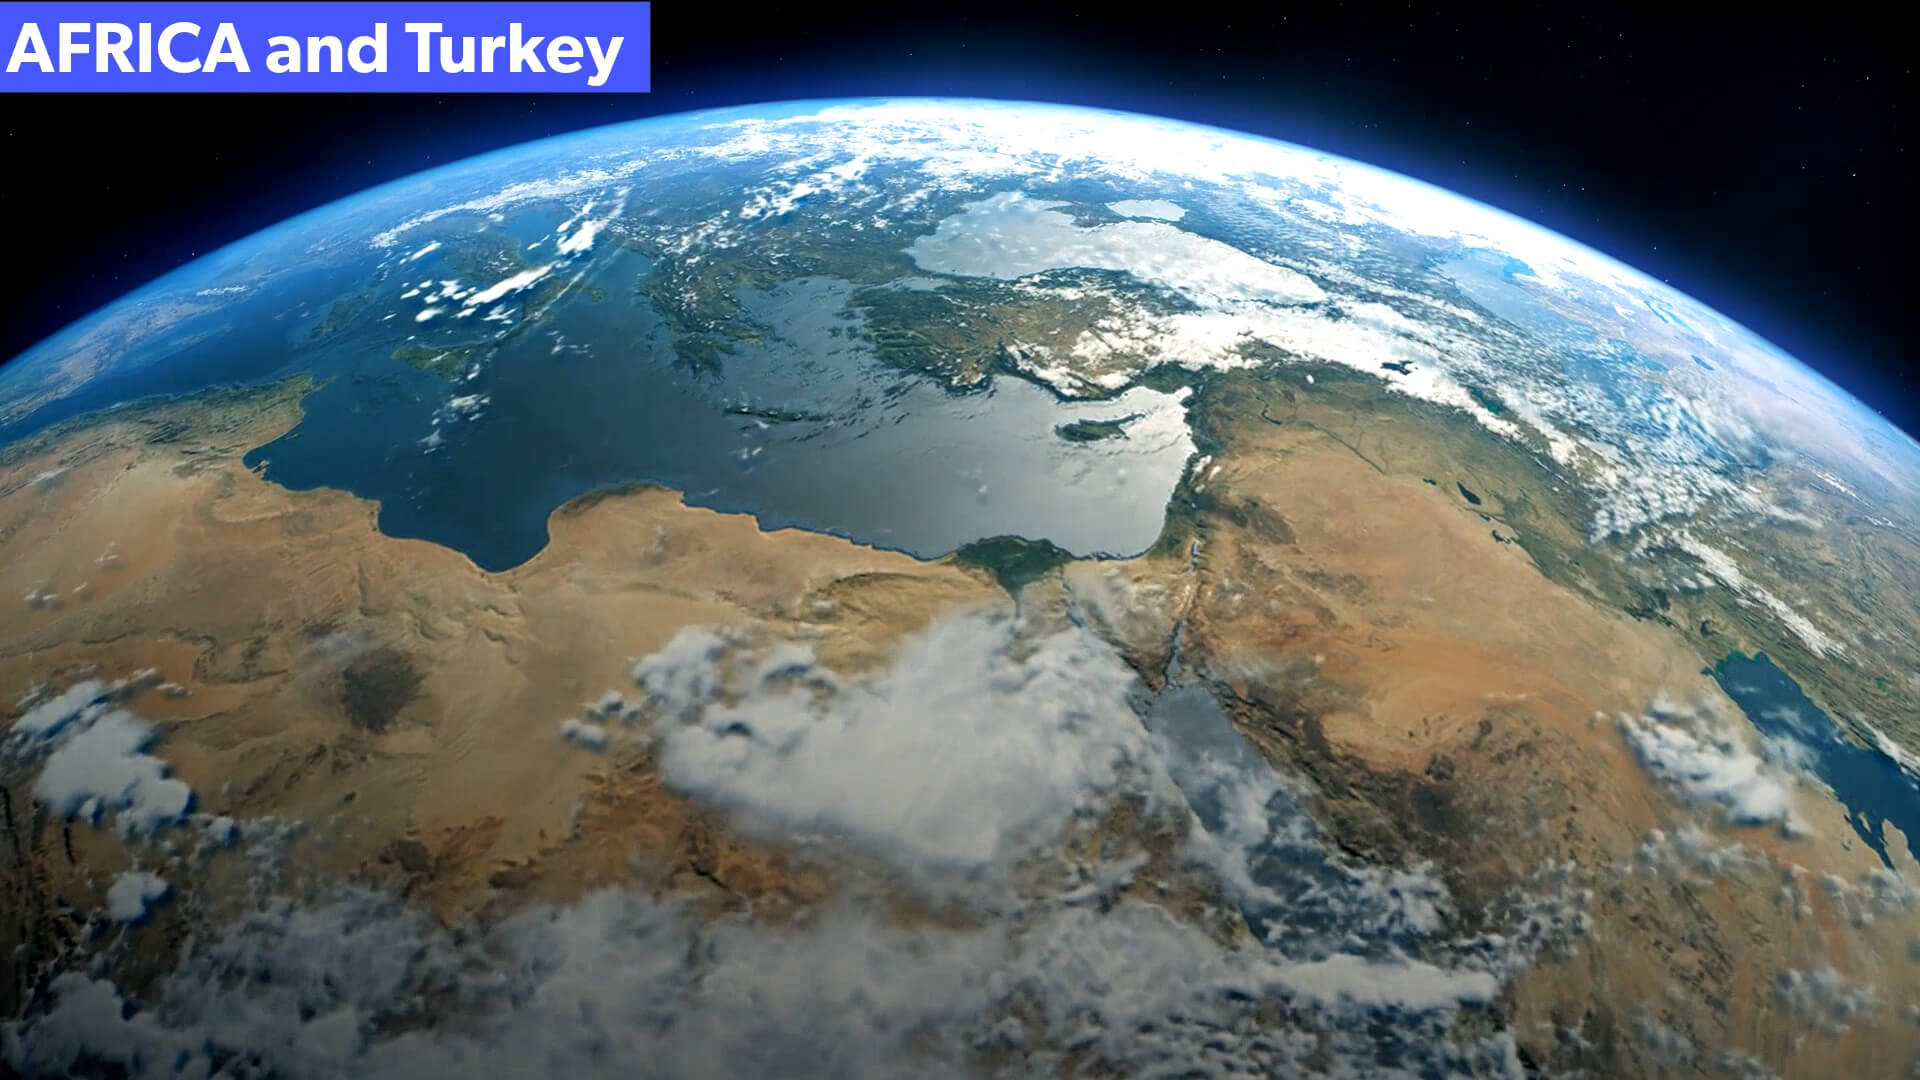 Africa and Turkey Satellite View from Space